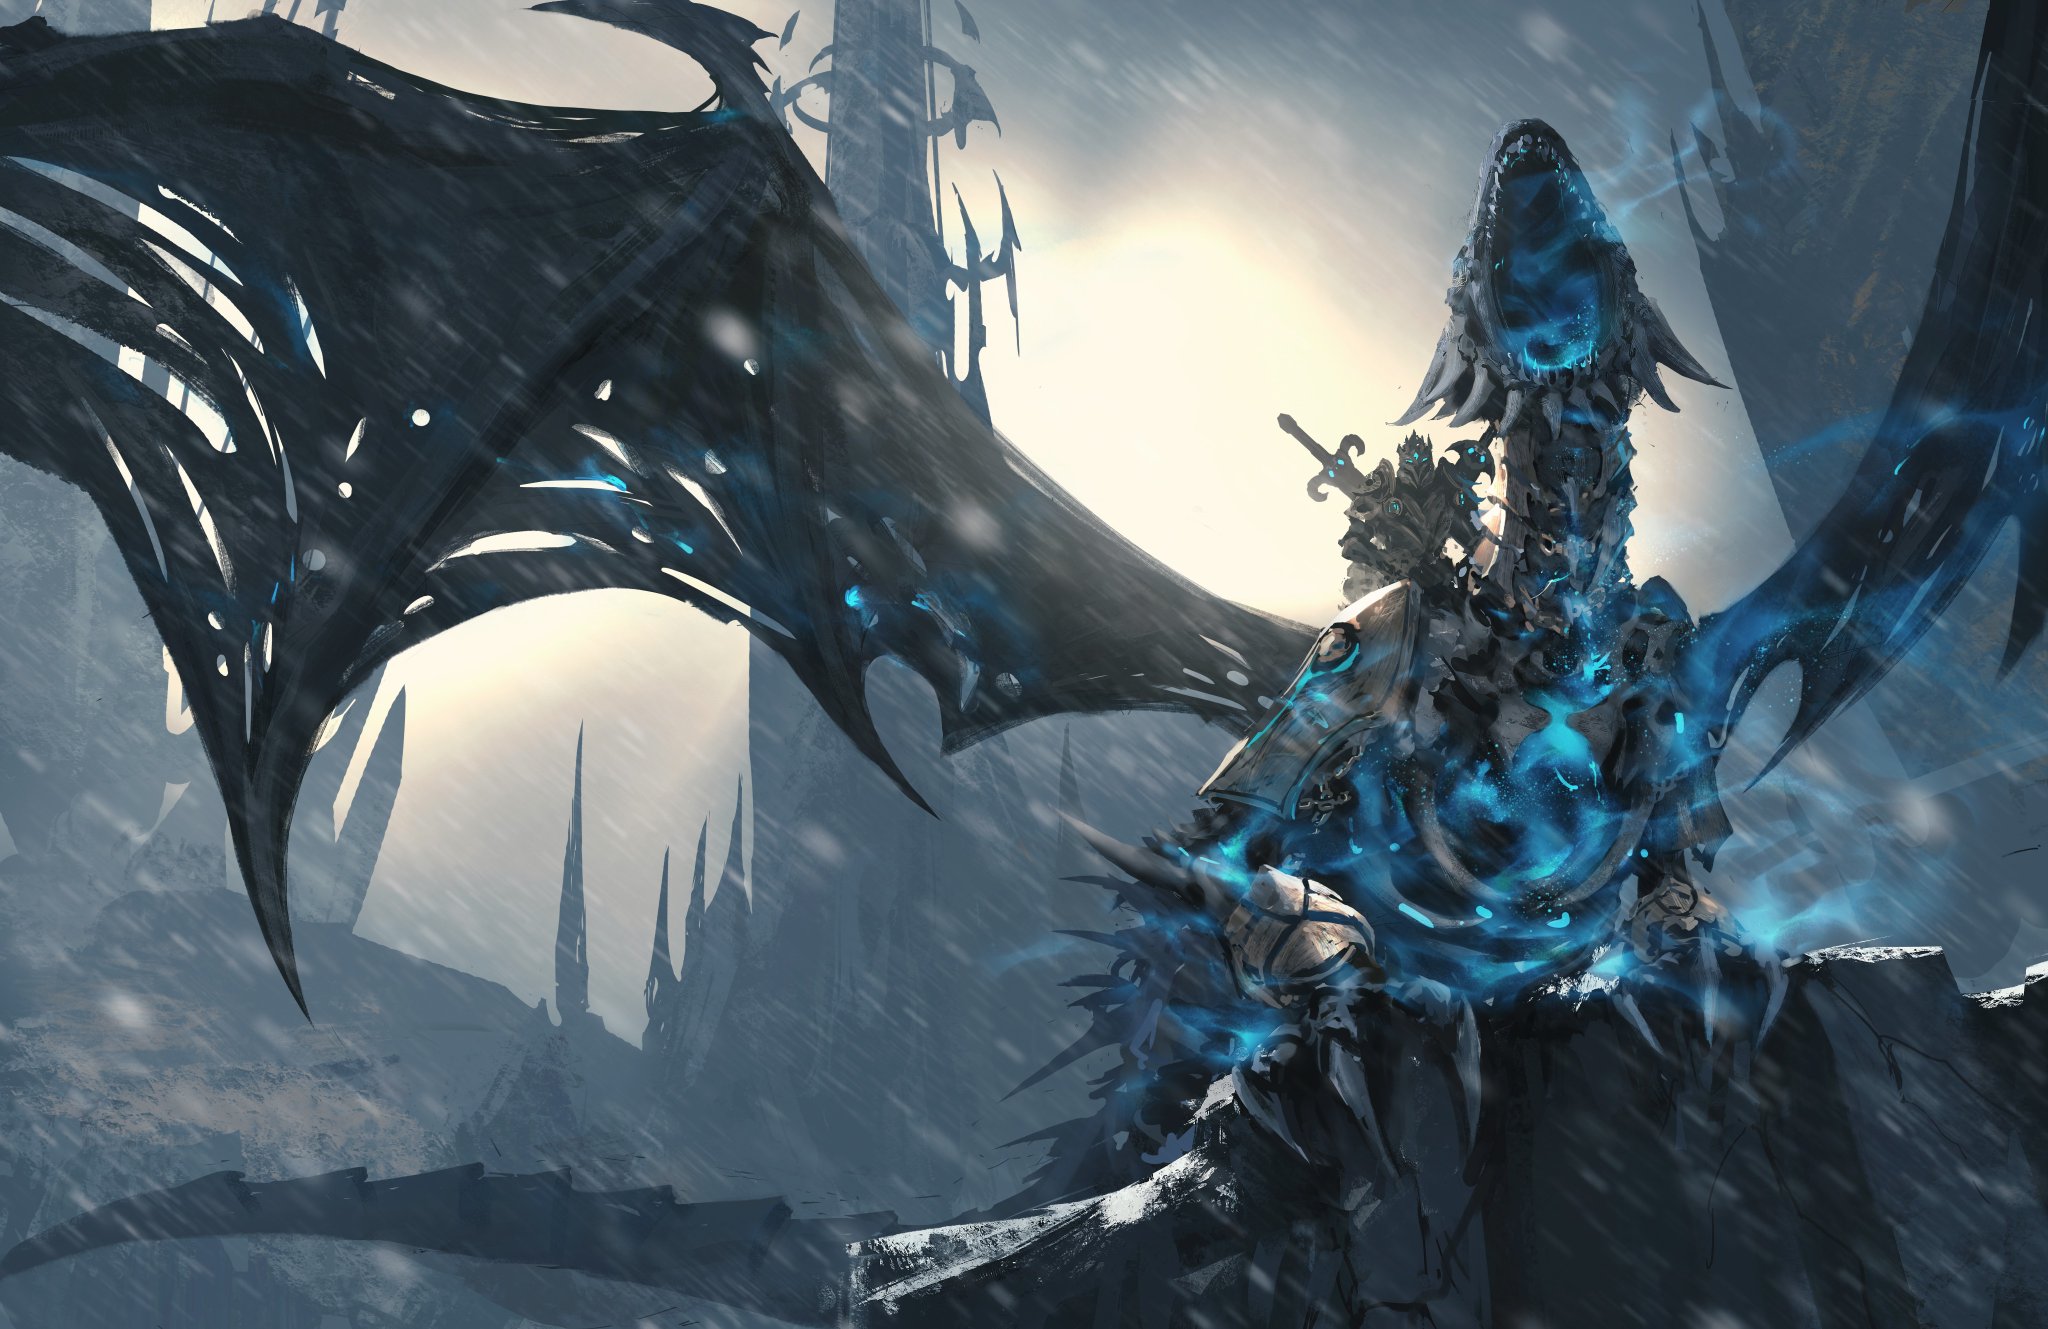 world of warcraft: wrath of the lich king, video game, dragon, lich king, warrior, world of warcraft, warcraft